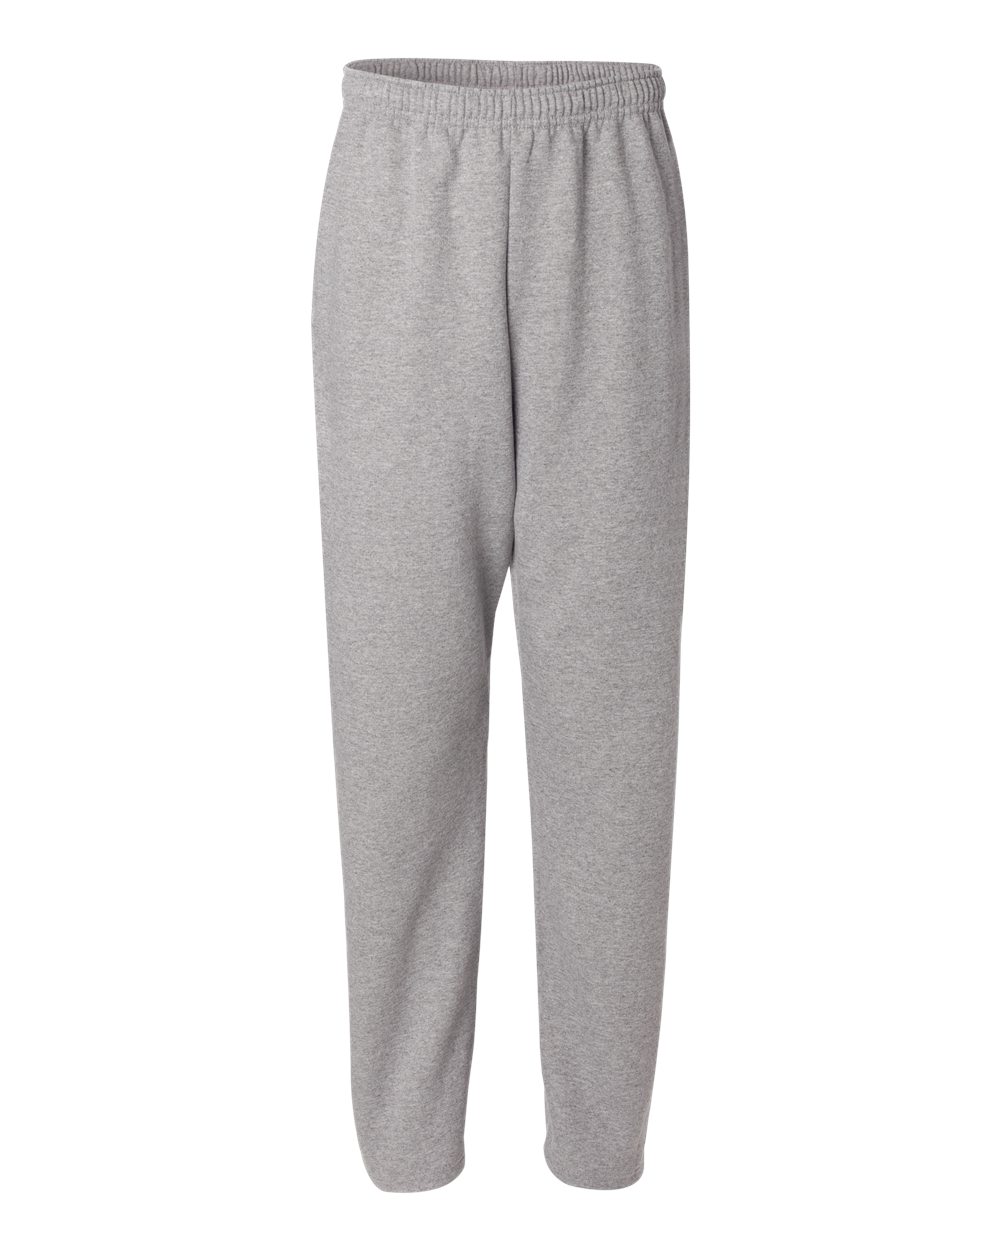 Jerzees 974 - Adult NuBlend Open-Bottom Sweatpants with Pockets $14.51 ...